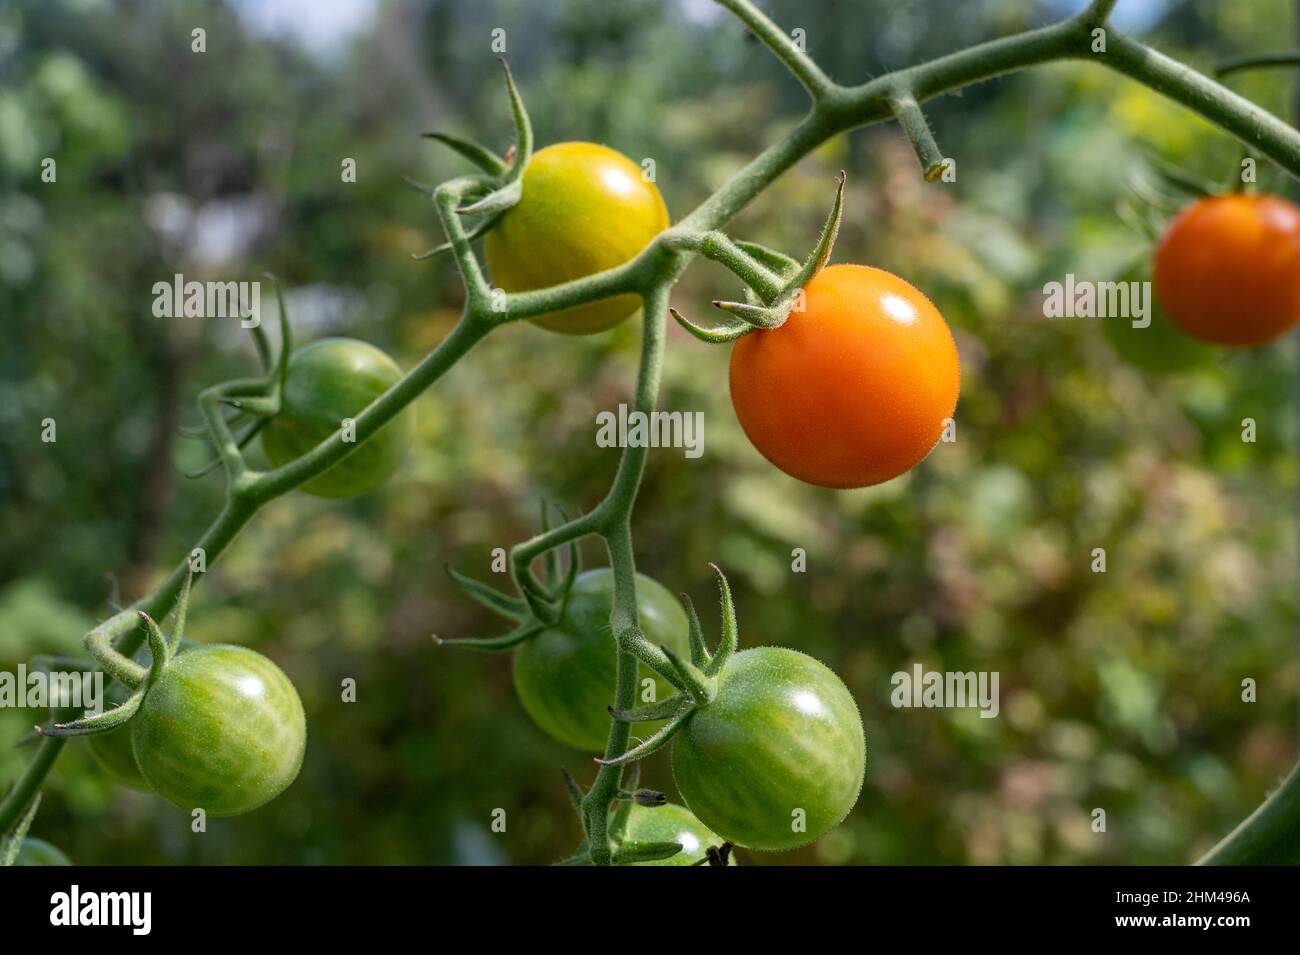 Homegrown Sungold tomatoes growing and ripening on a vine. Stock Photo